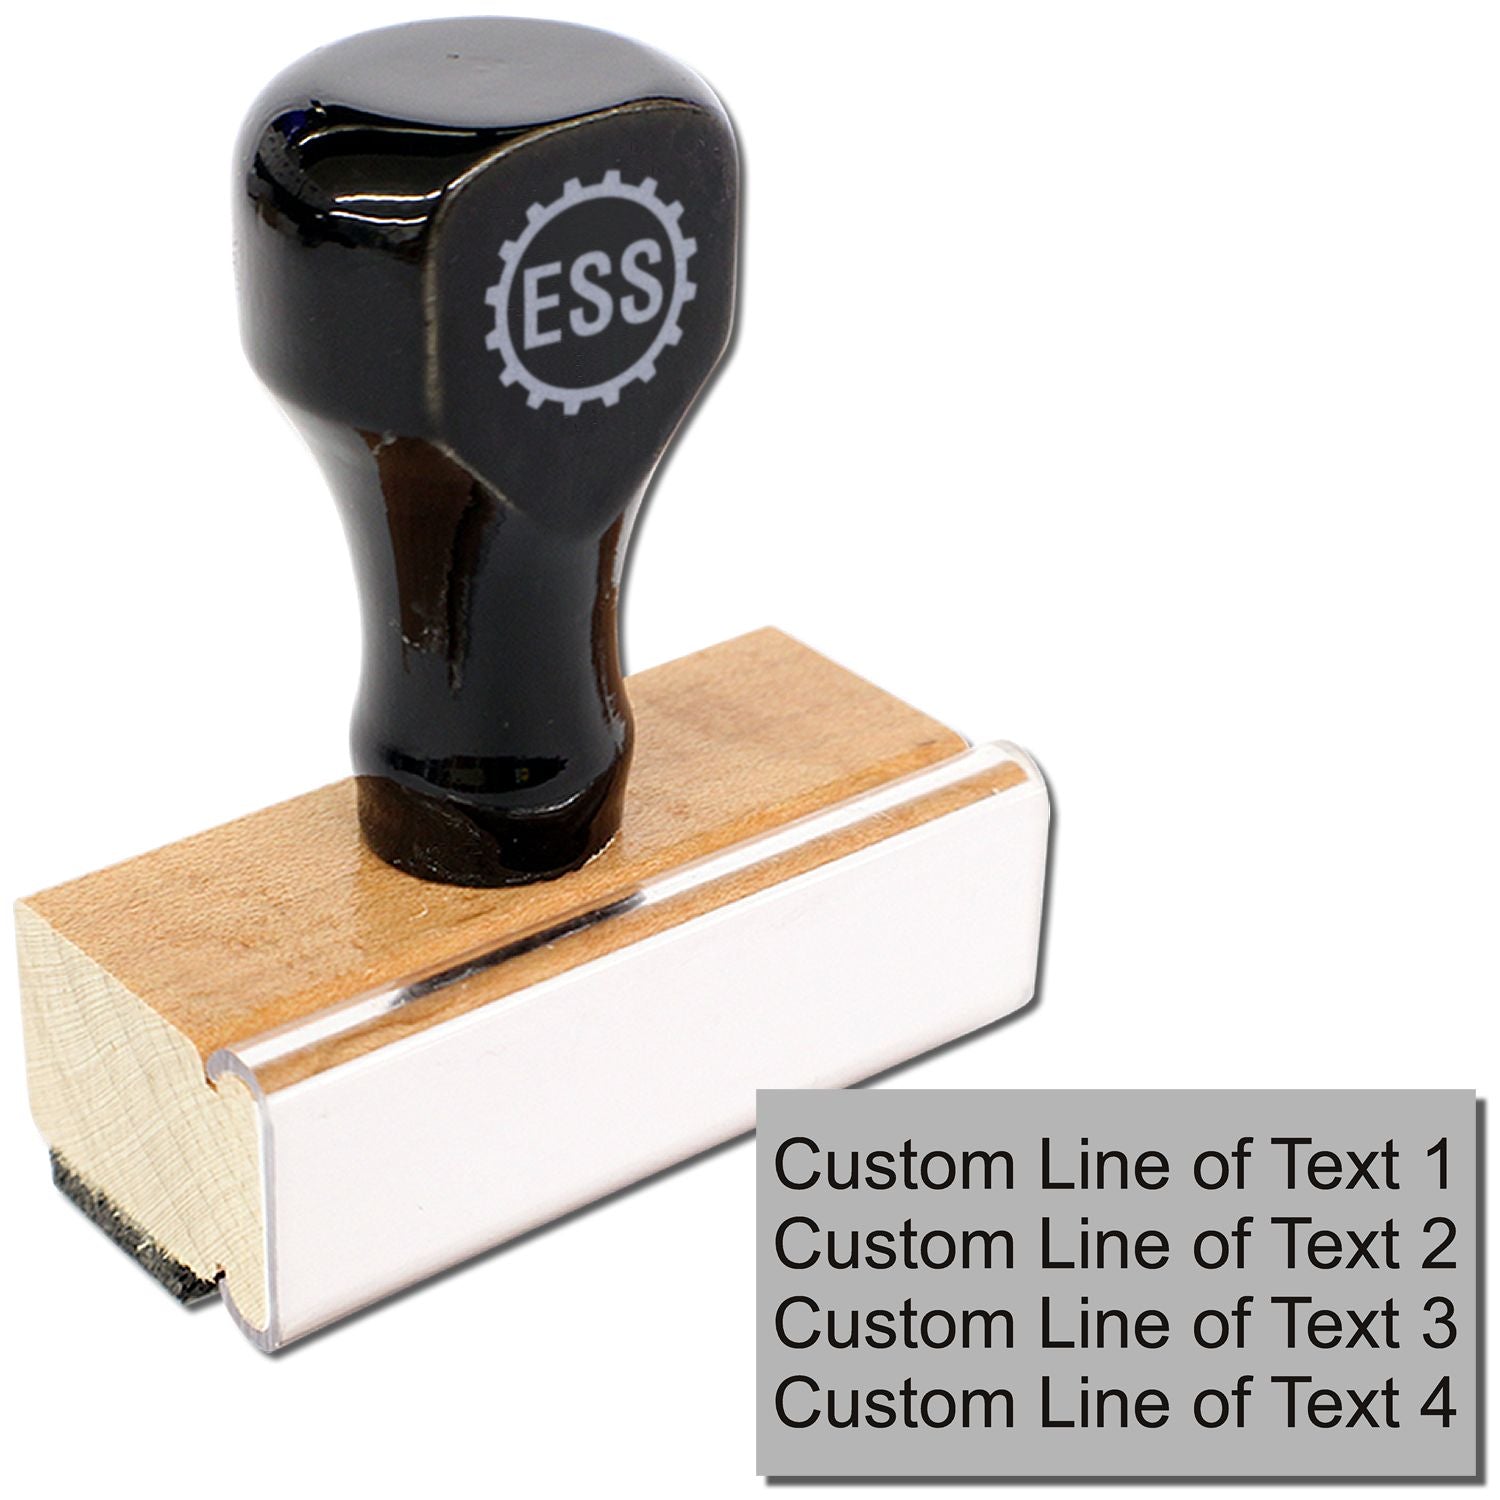 Approved Custom Rubber Stamp